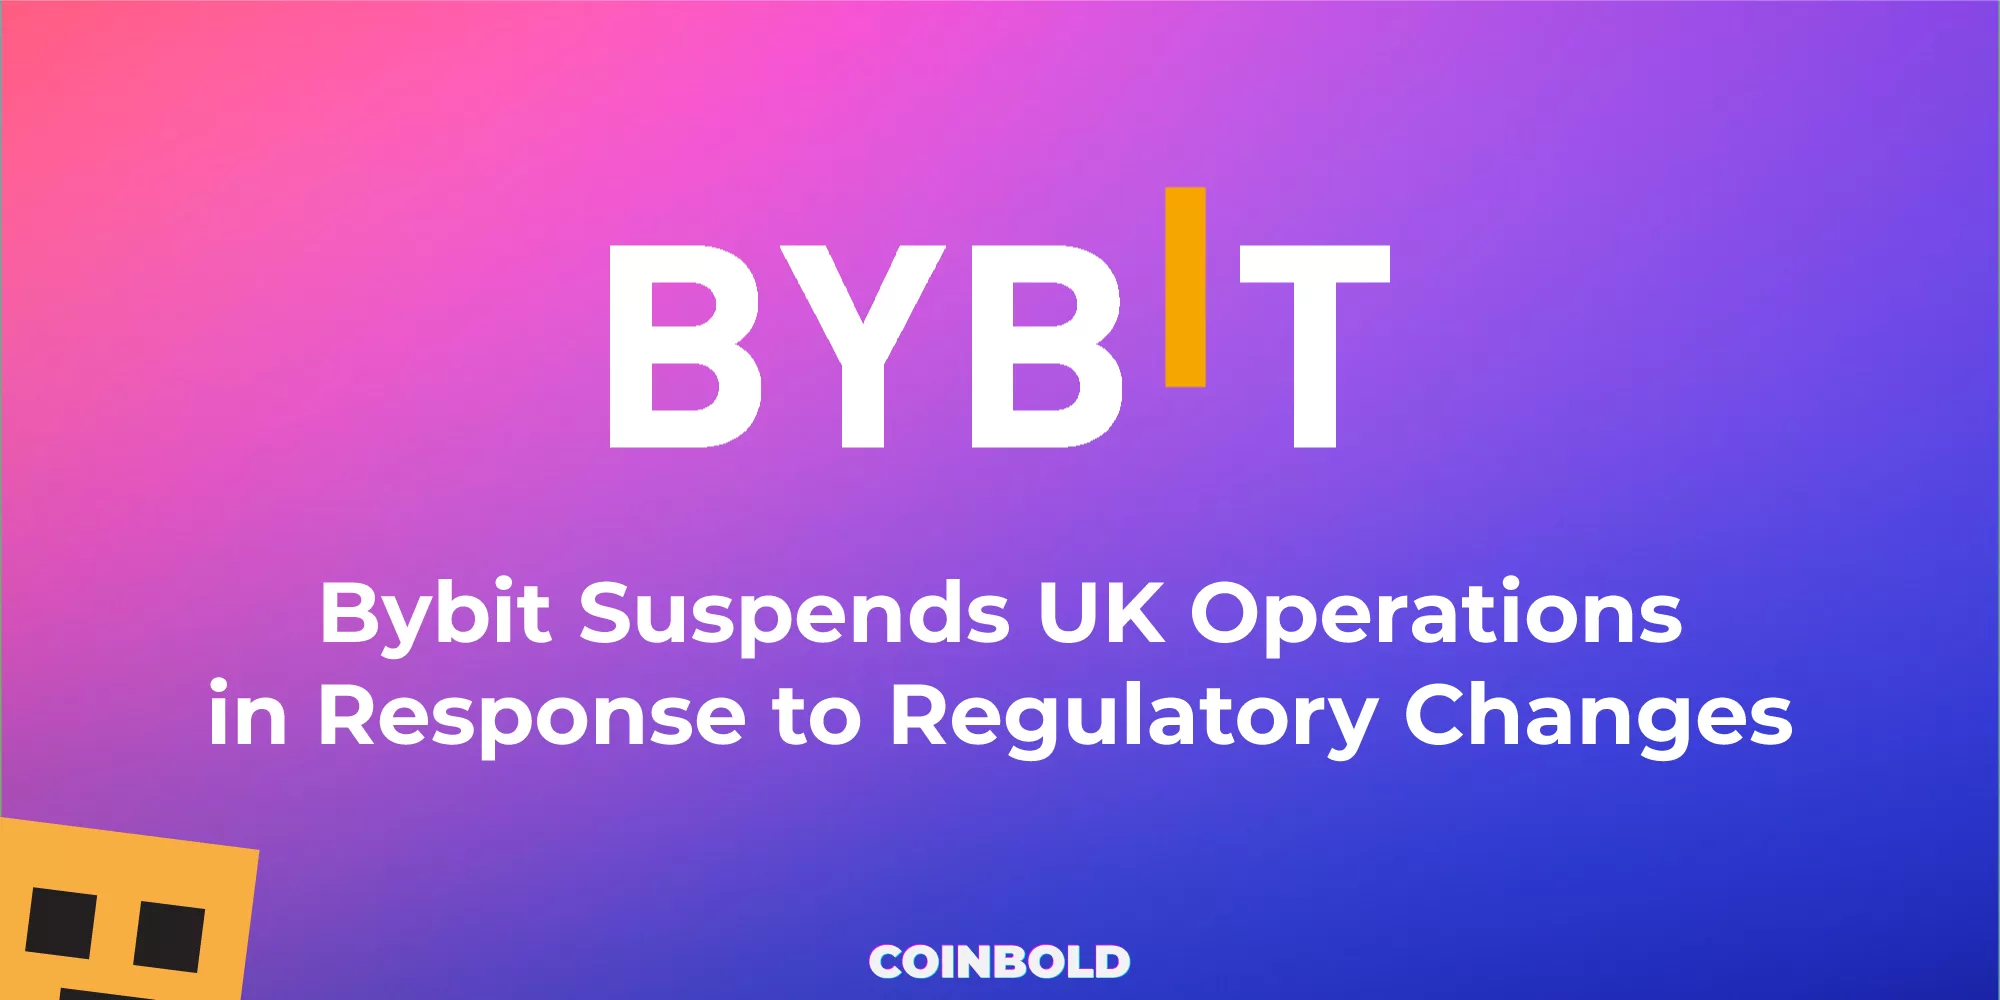 Bybit Suspends UK Operations in Response to Regulatory Changes